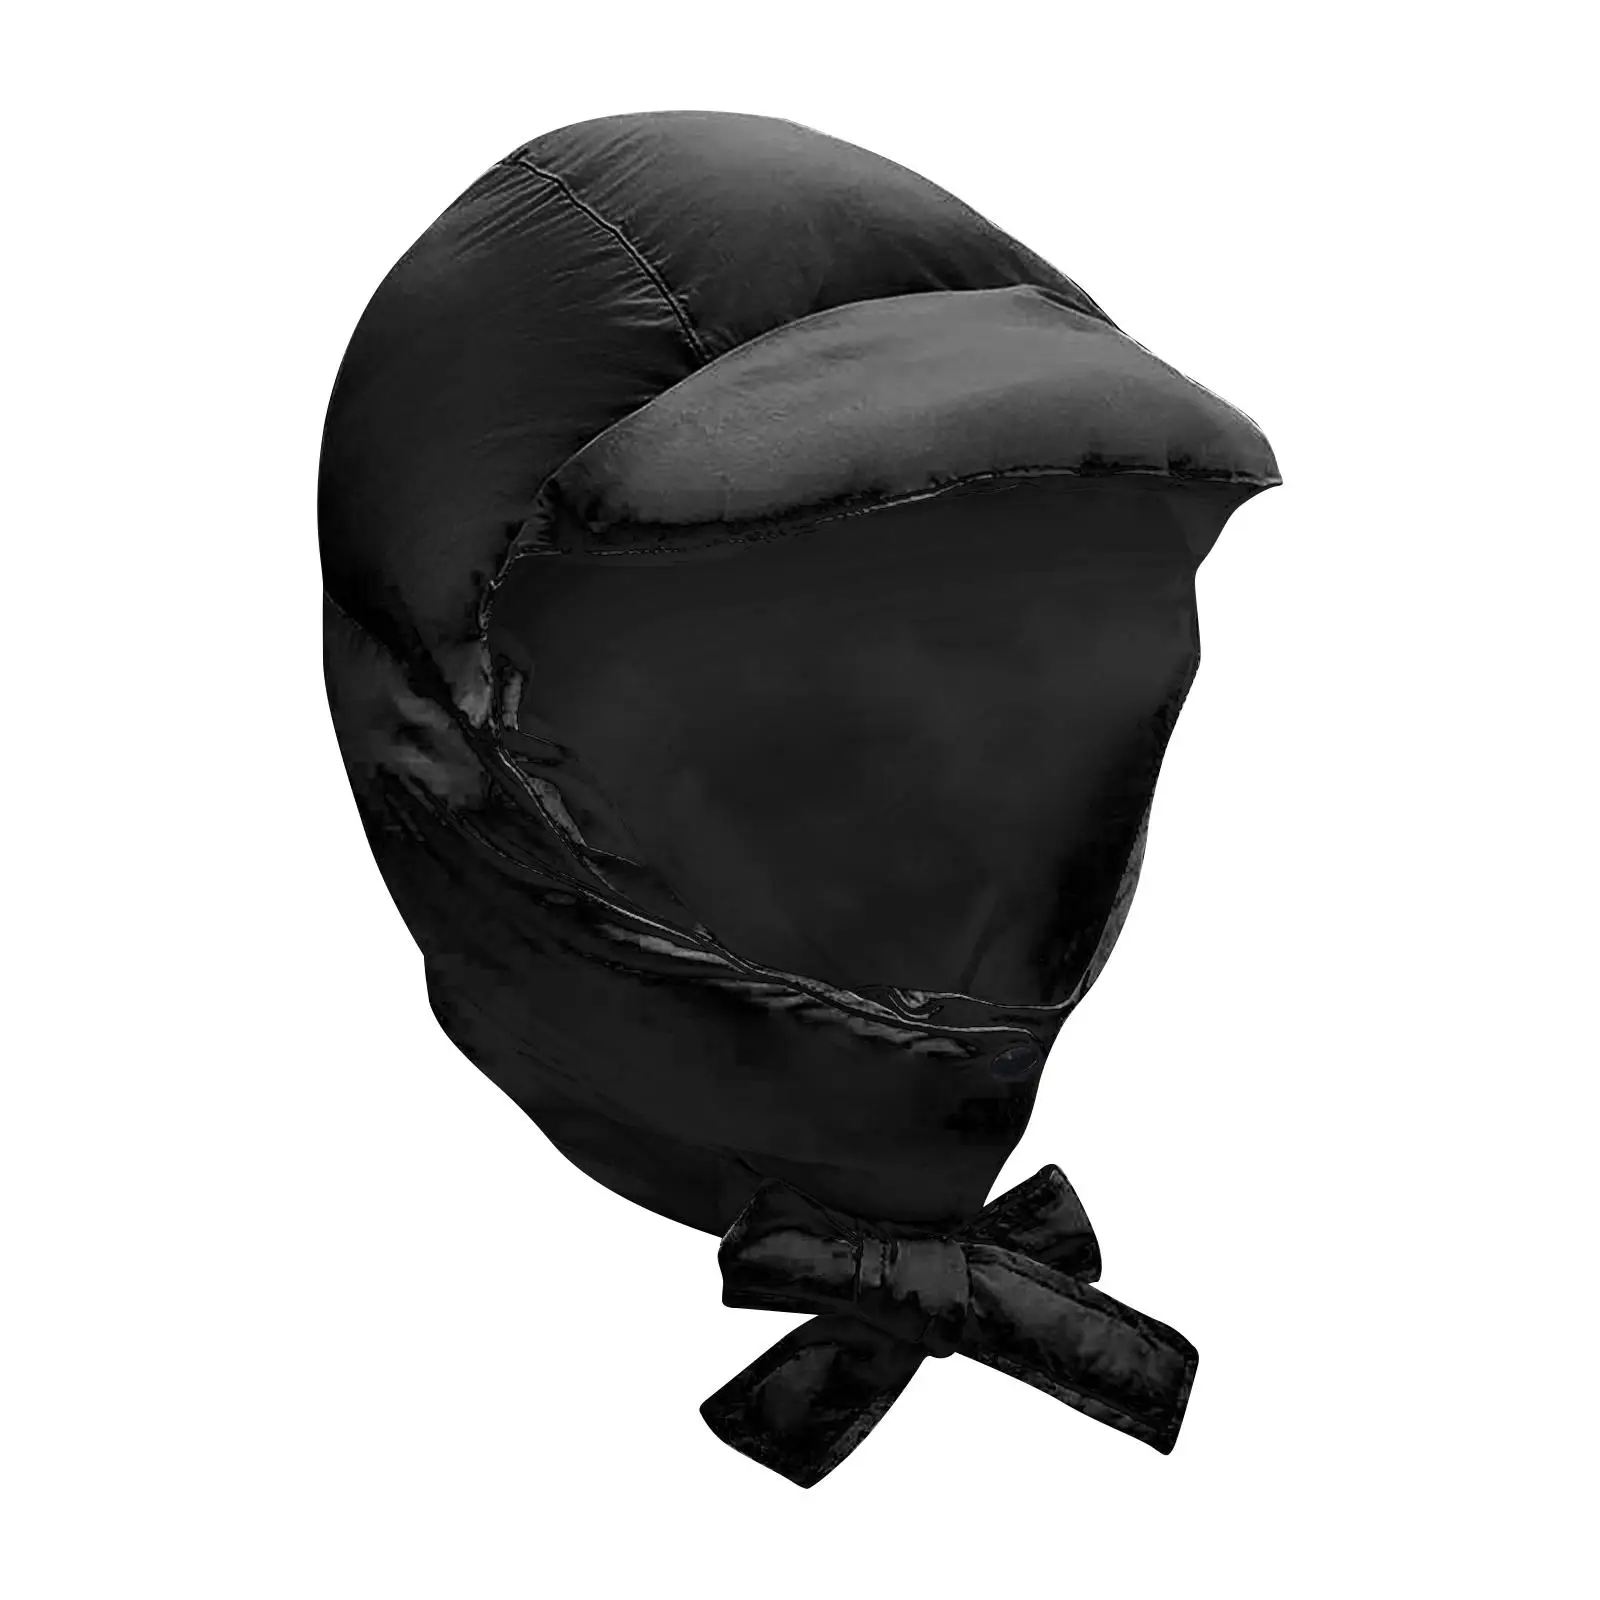 Down Hat with Earflaps Windproof Fashionable for Men Women Thickened Down Cap for Bicycle Skating Biking Outdoor Climbing